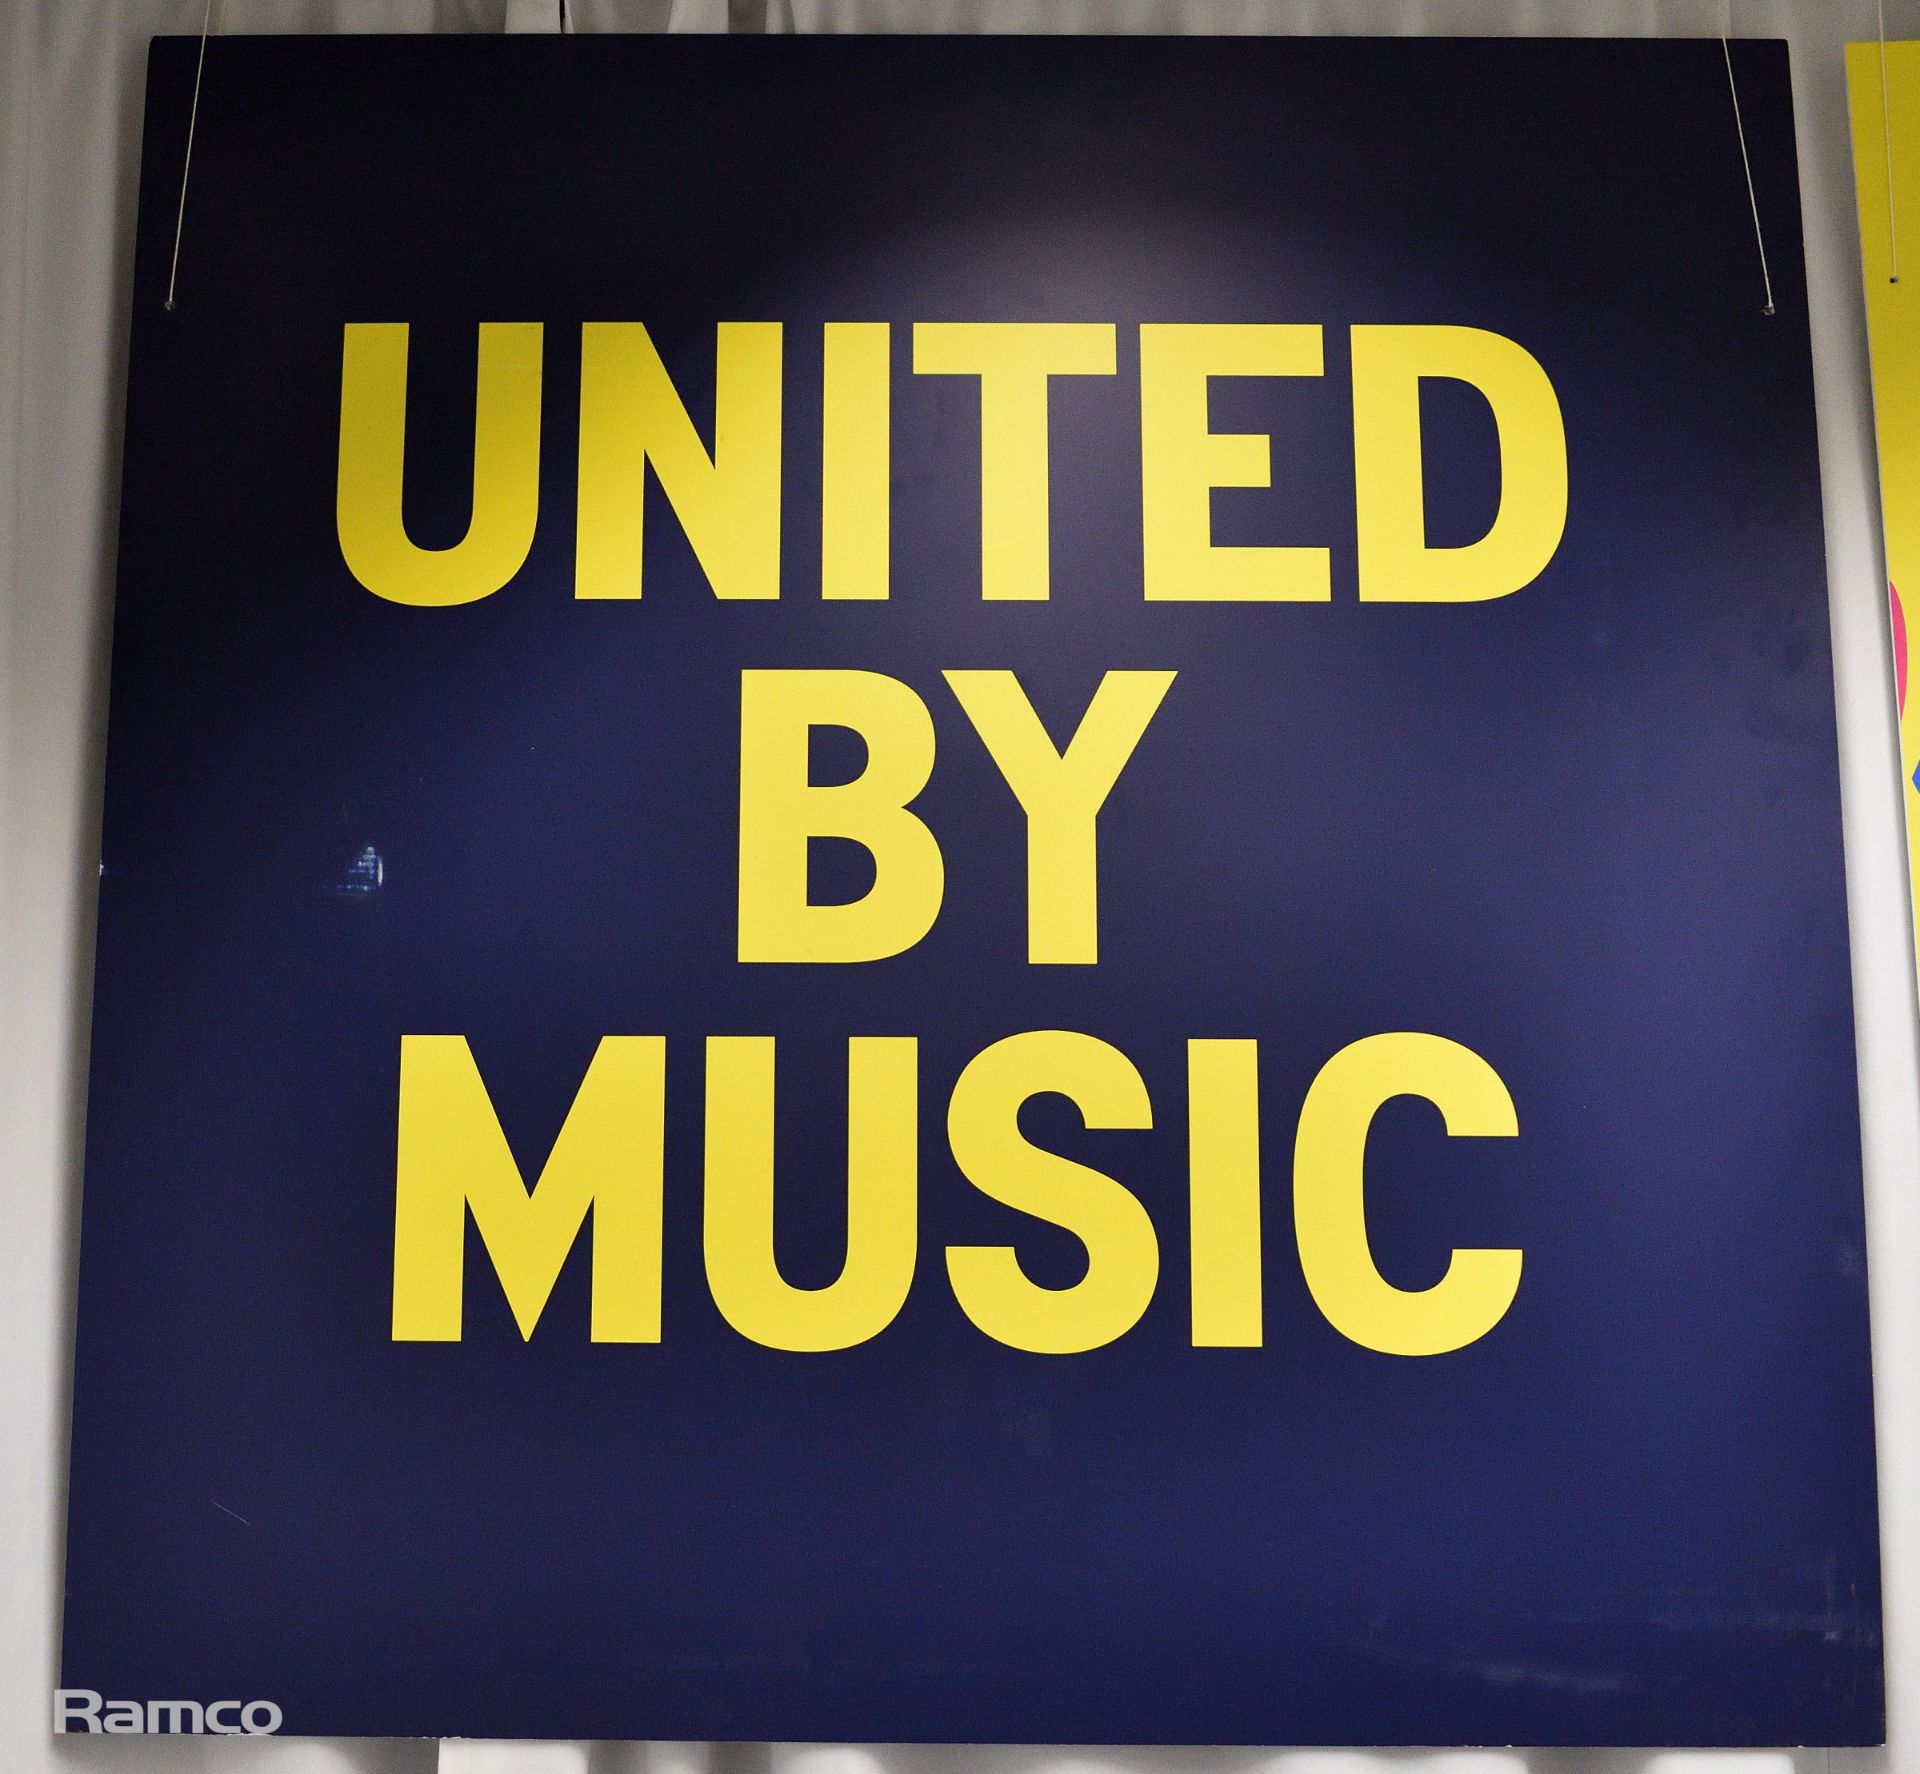 BBC Eurovision board & United by Music display board - Image 2 of 3